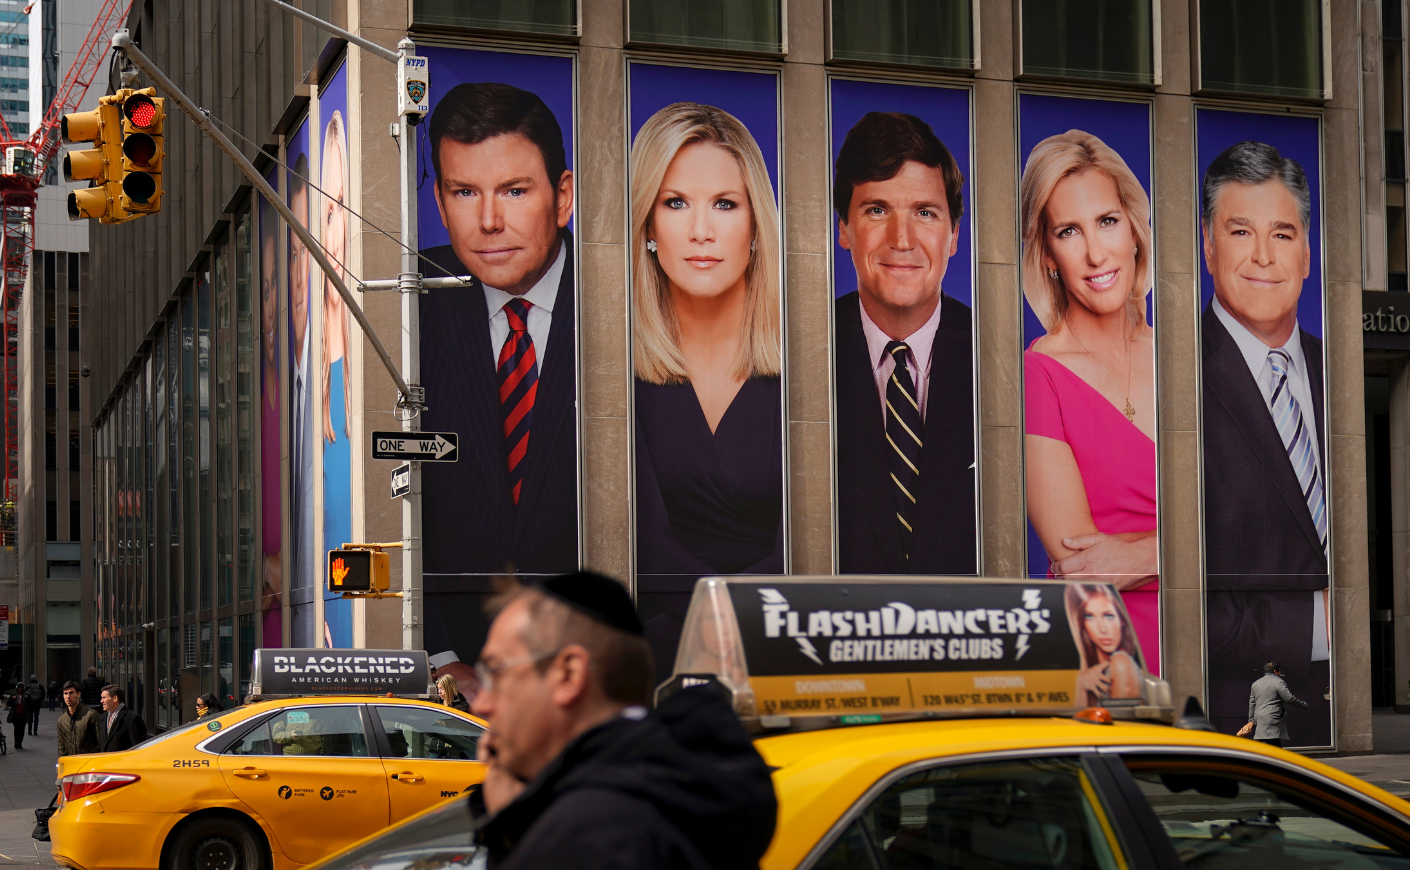 A billboard in New York City displays the faces of Fox News hosts